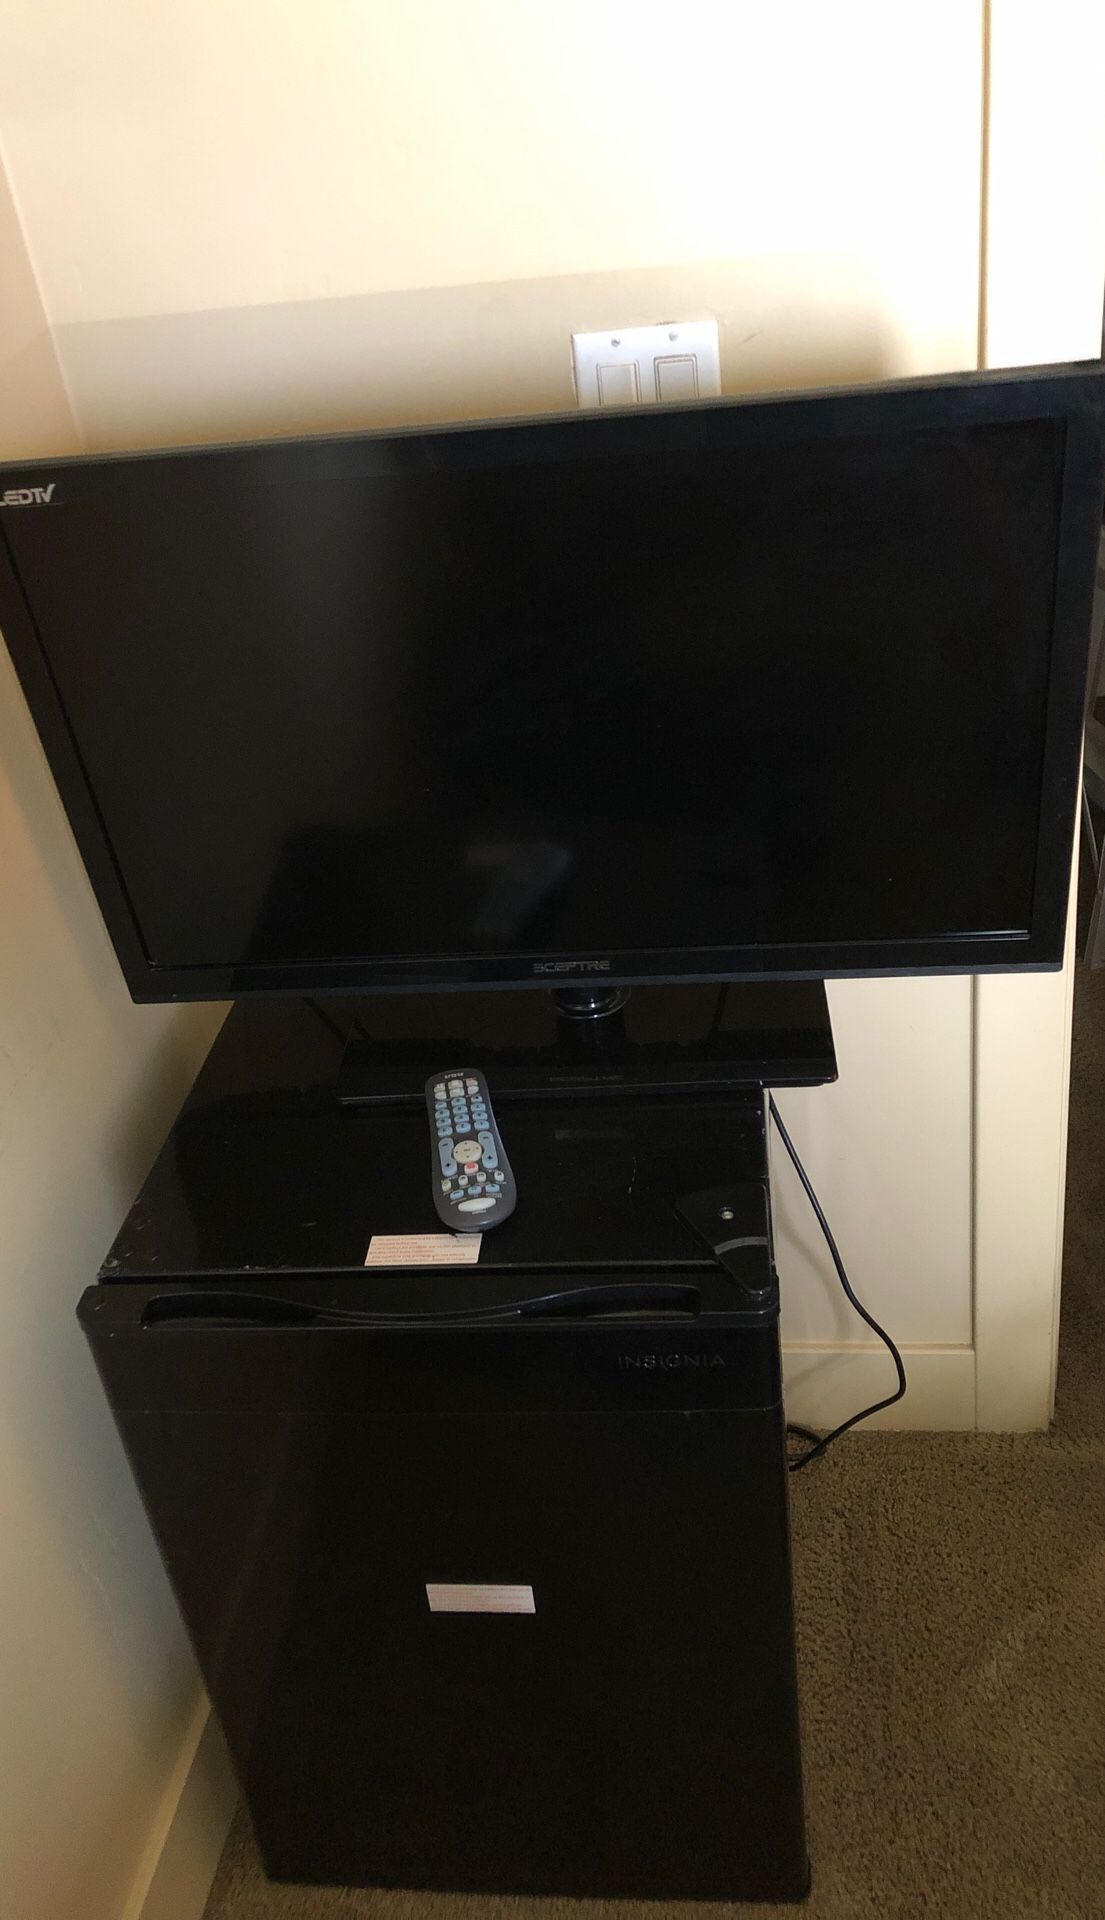 Fridge and TV package deal, 32 inch monitor